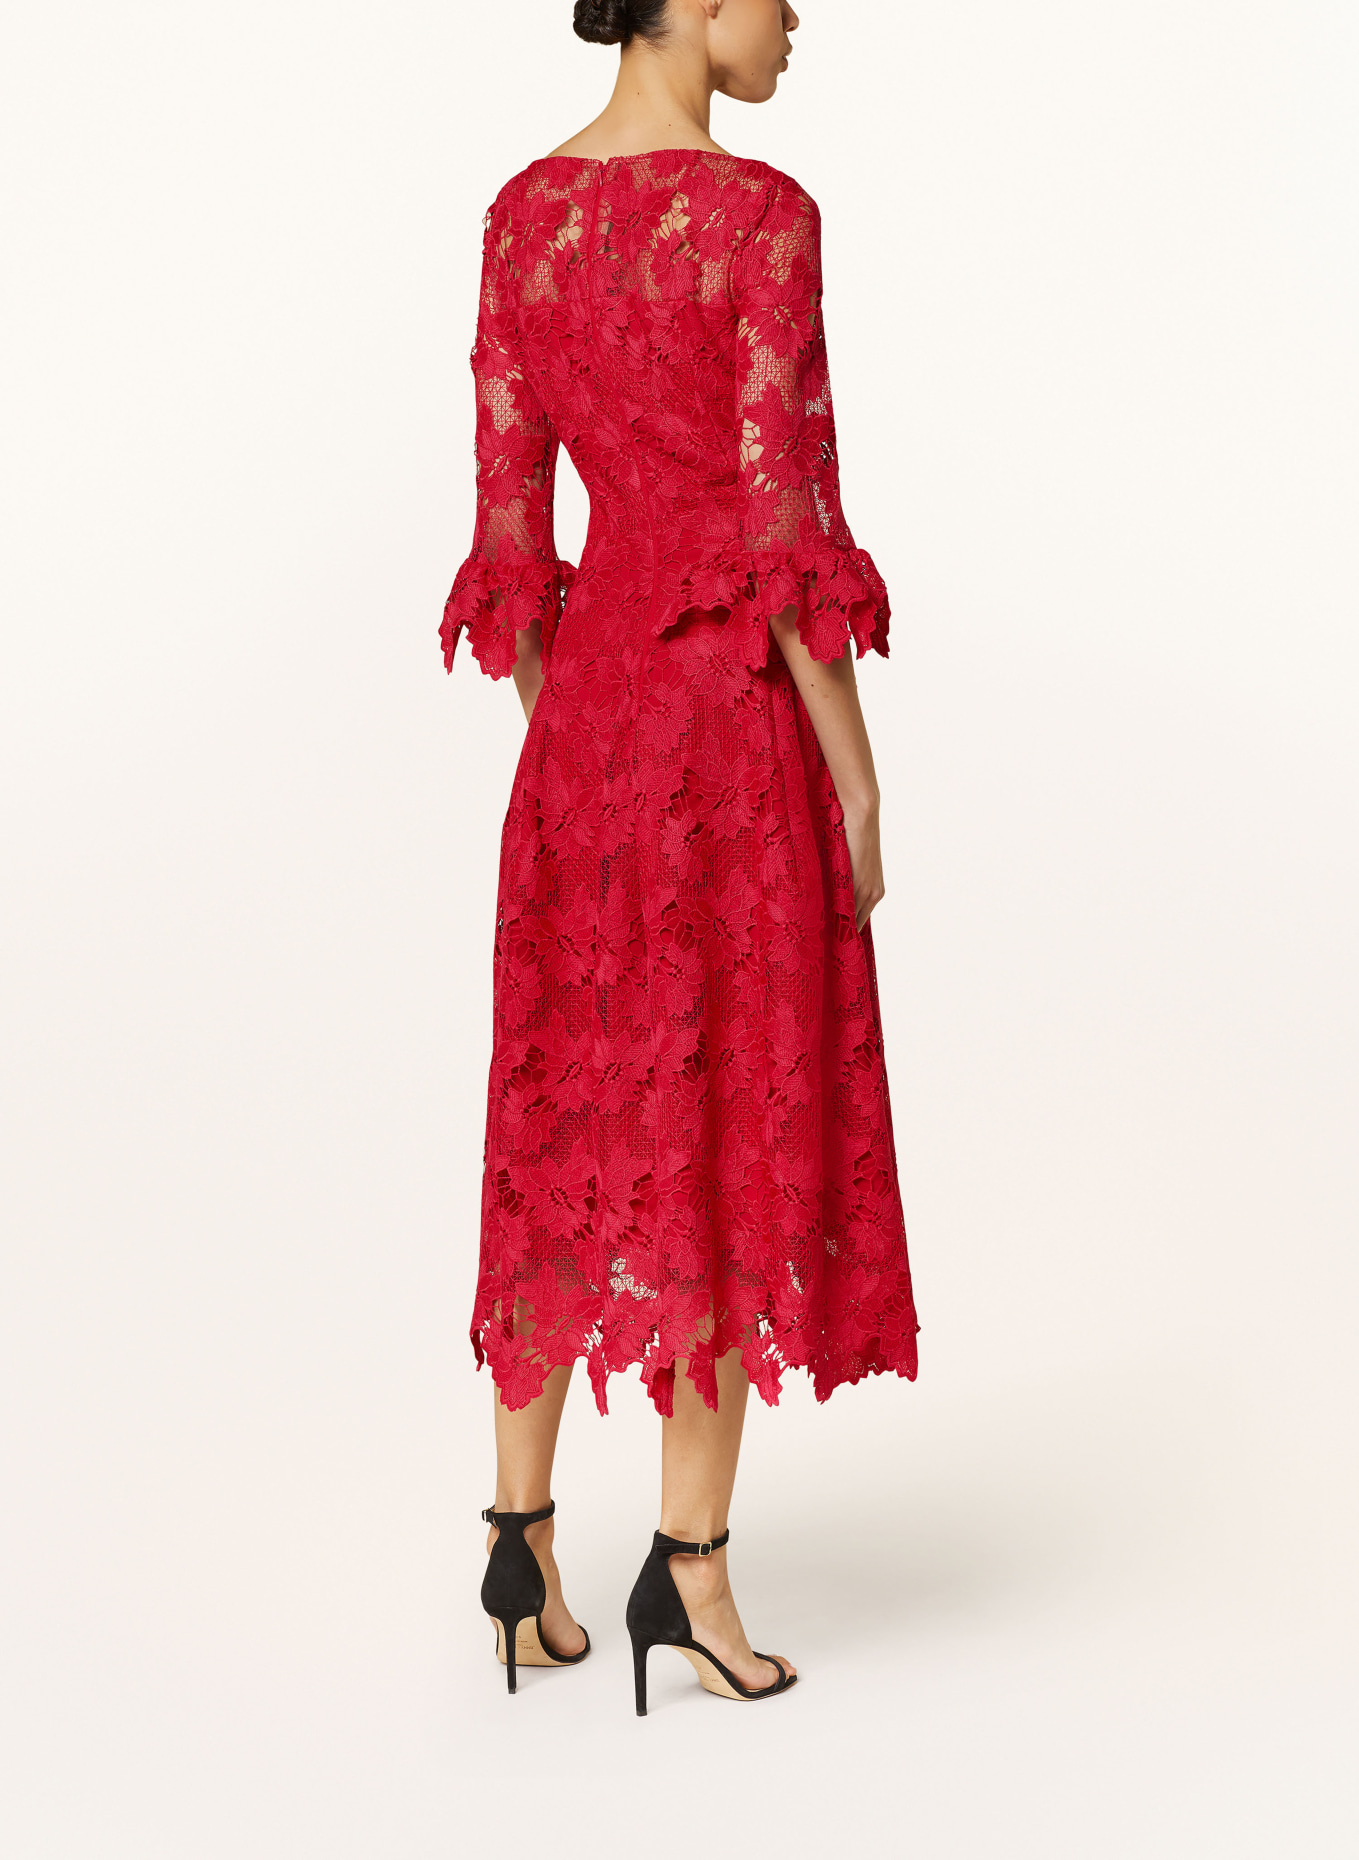 TALBOT RUNHOF Lace dress with 3/4 sleeve, Color: PINK (Image 3)